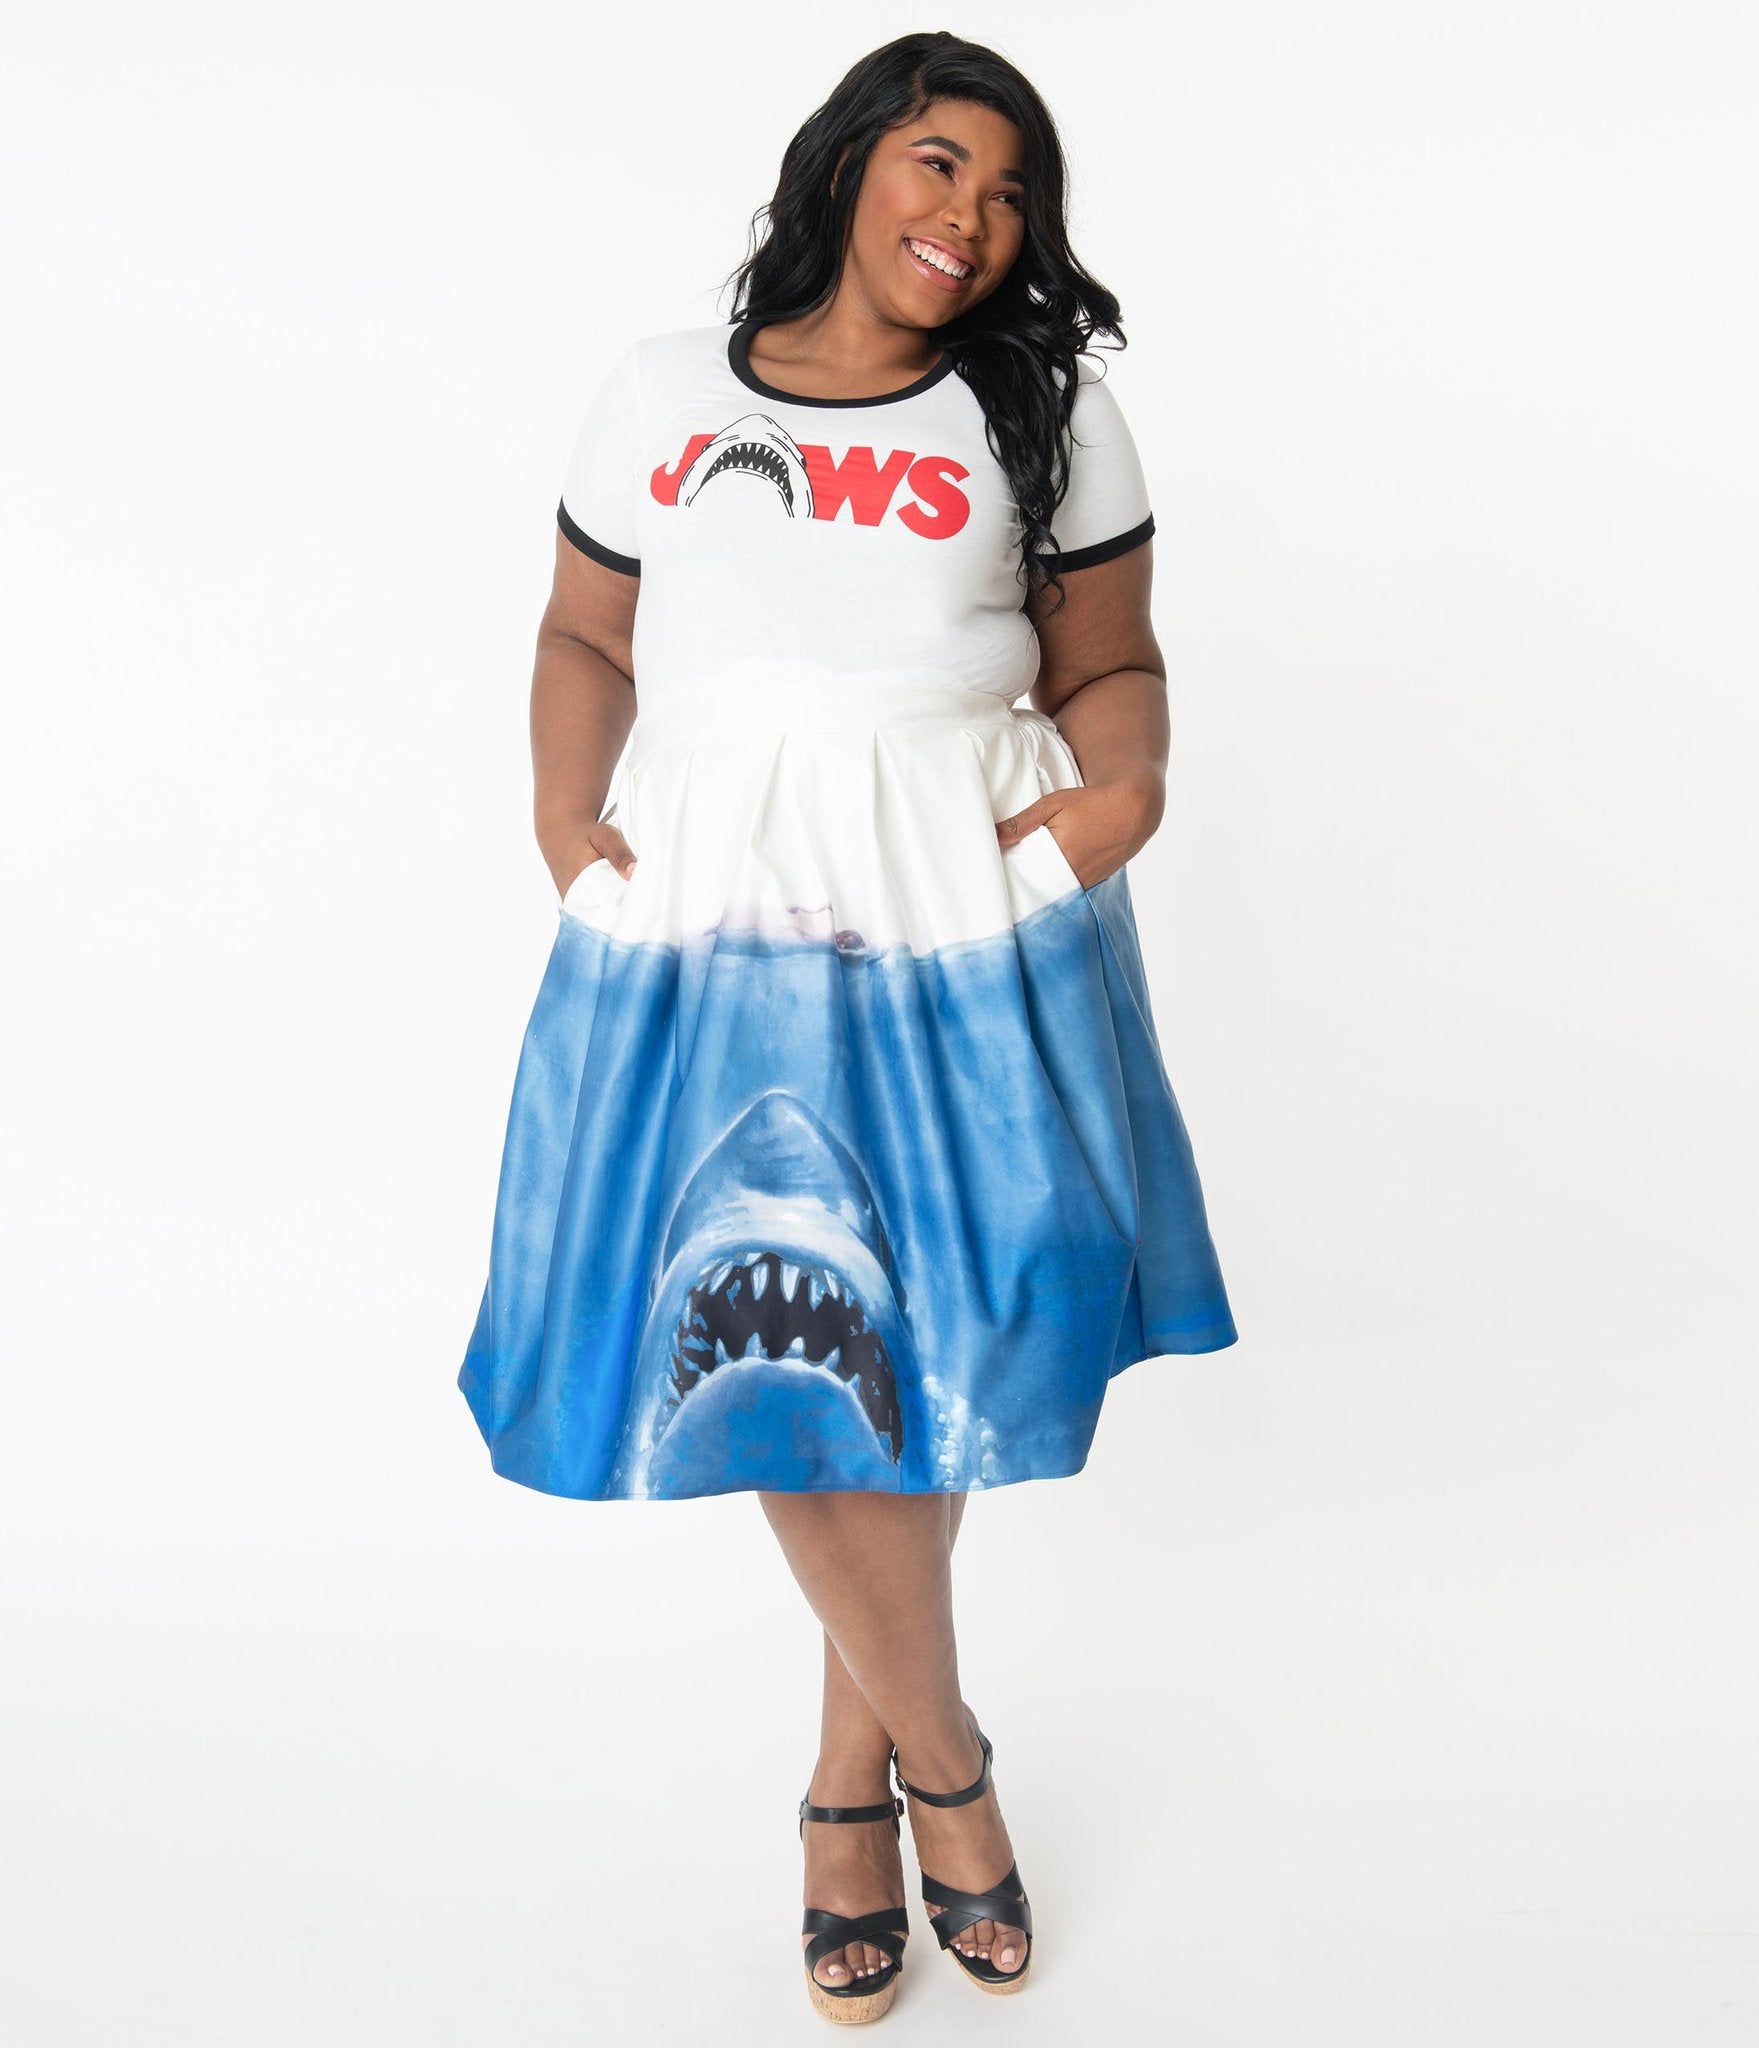 This is a Unique Vintage Jaws movie poster skirt and the model has dark hair, red shoes and the skirt is white at the top, blue water on the bottom and a shark coming up to eat a swimmer, on a plus size model.